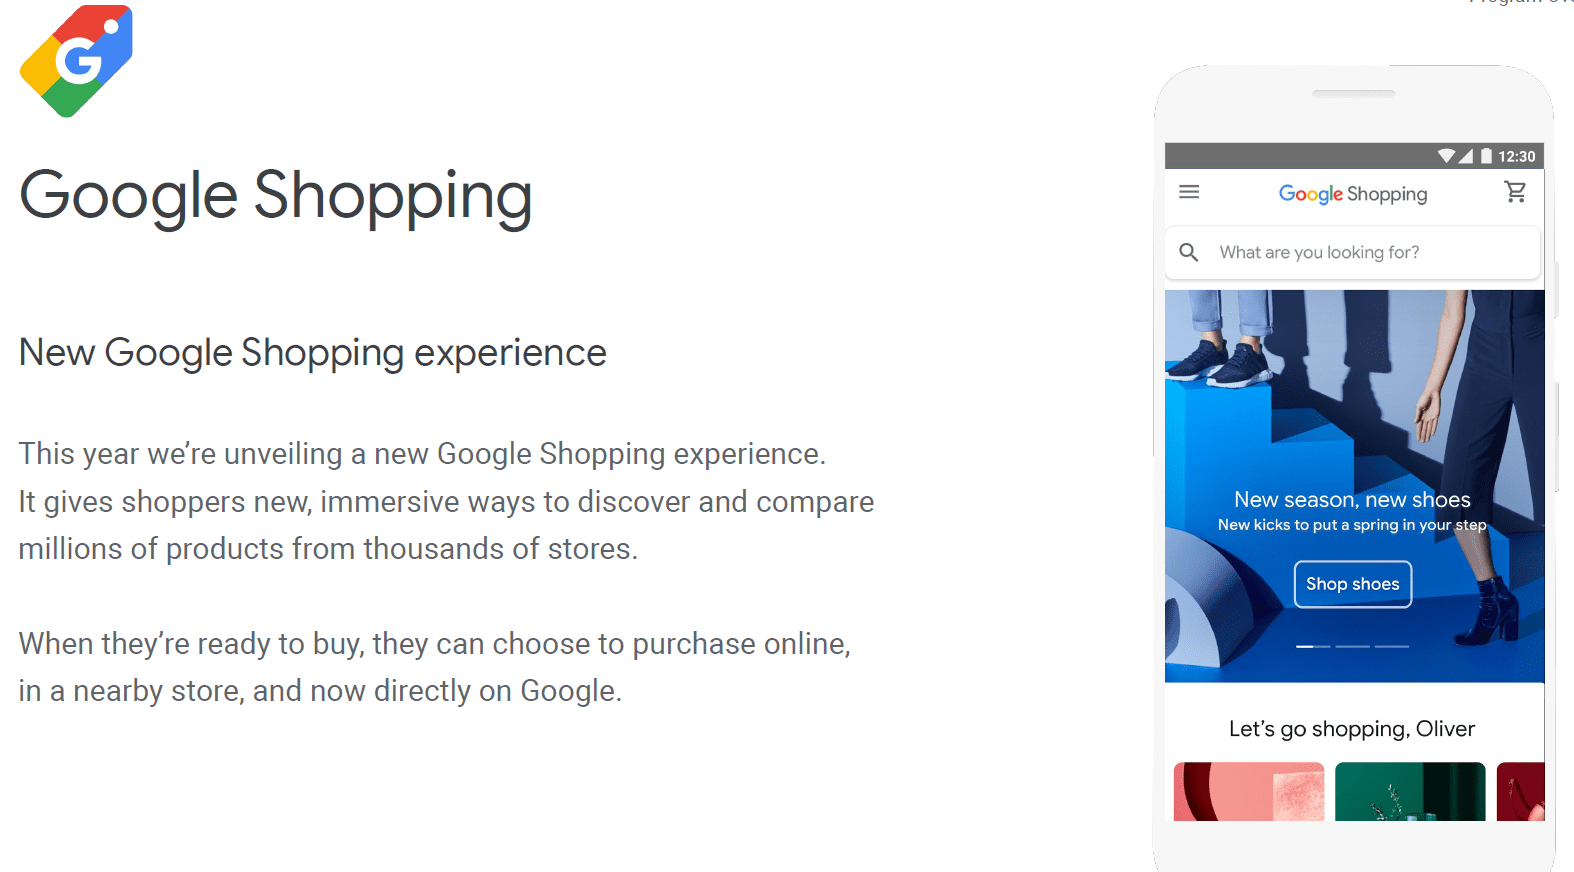 Screenshot with details of the new Google Shopping experience